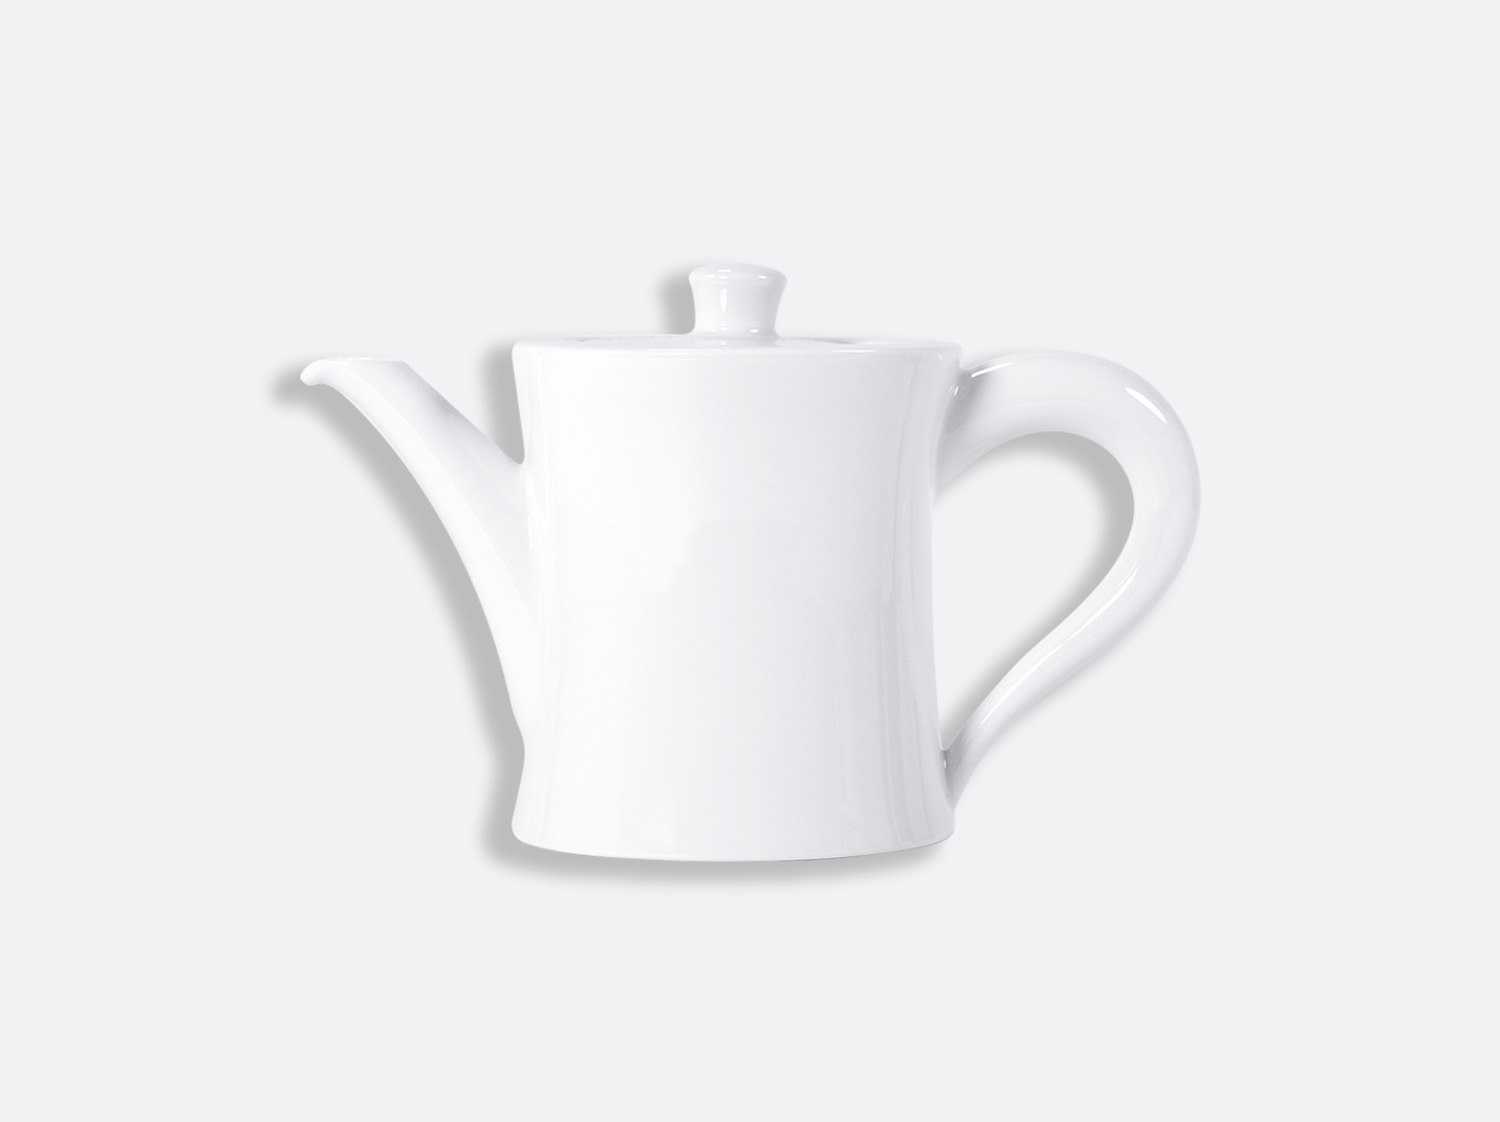 China Galerie hot beverage server 40 cl of the collection Blanc | Bernardaud